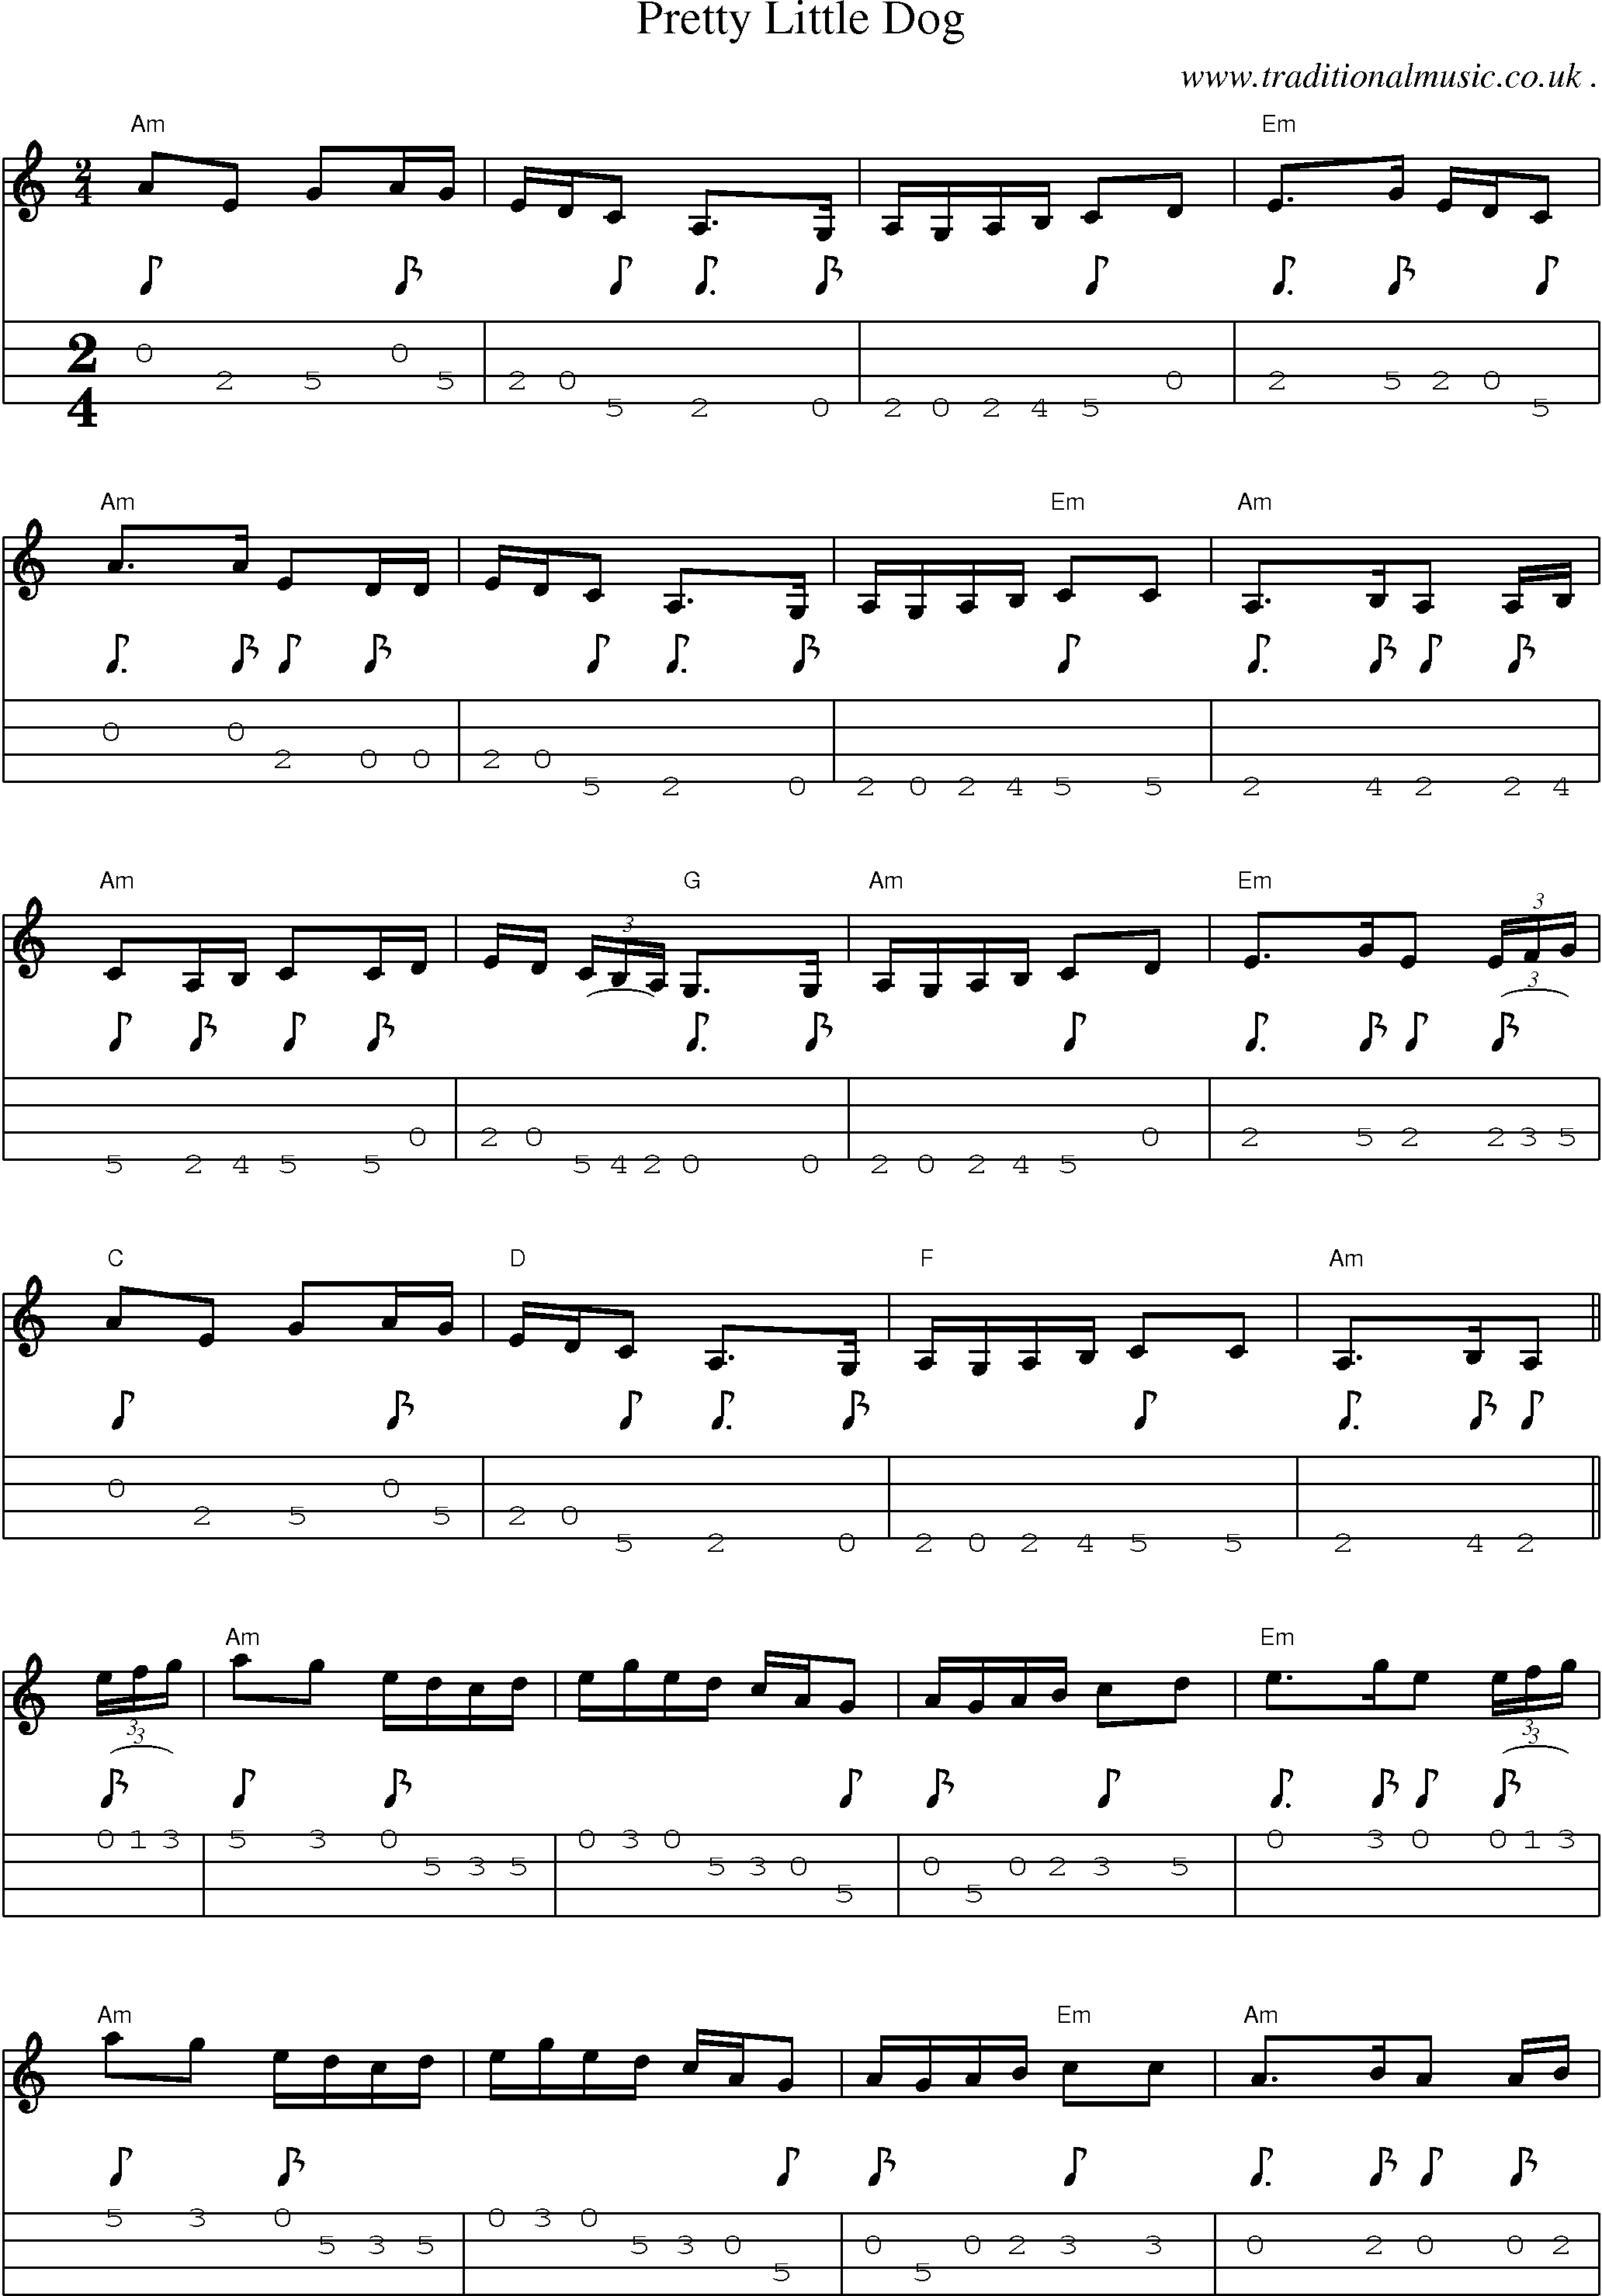 Music Score and Mandolin Tabs for Pretty Little Dog